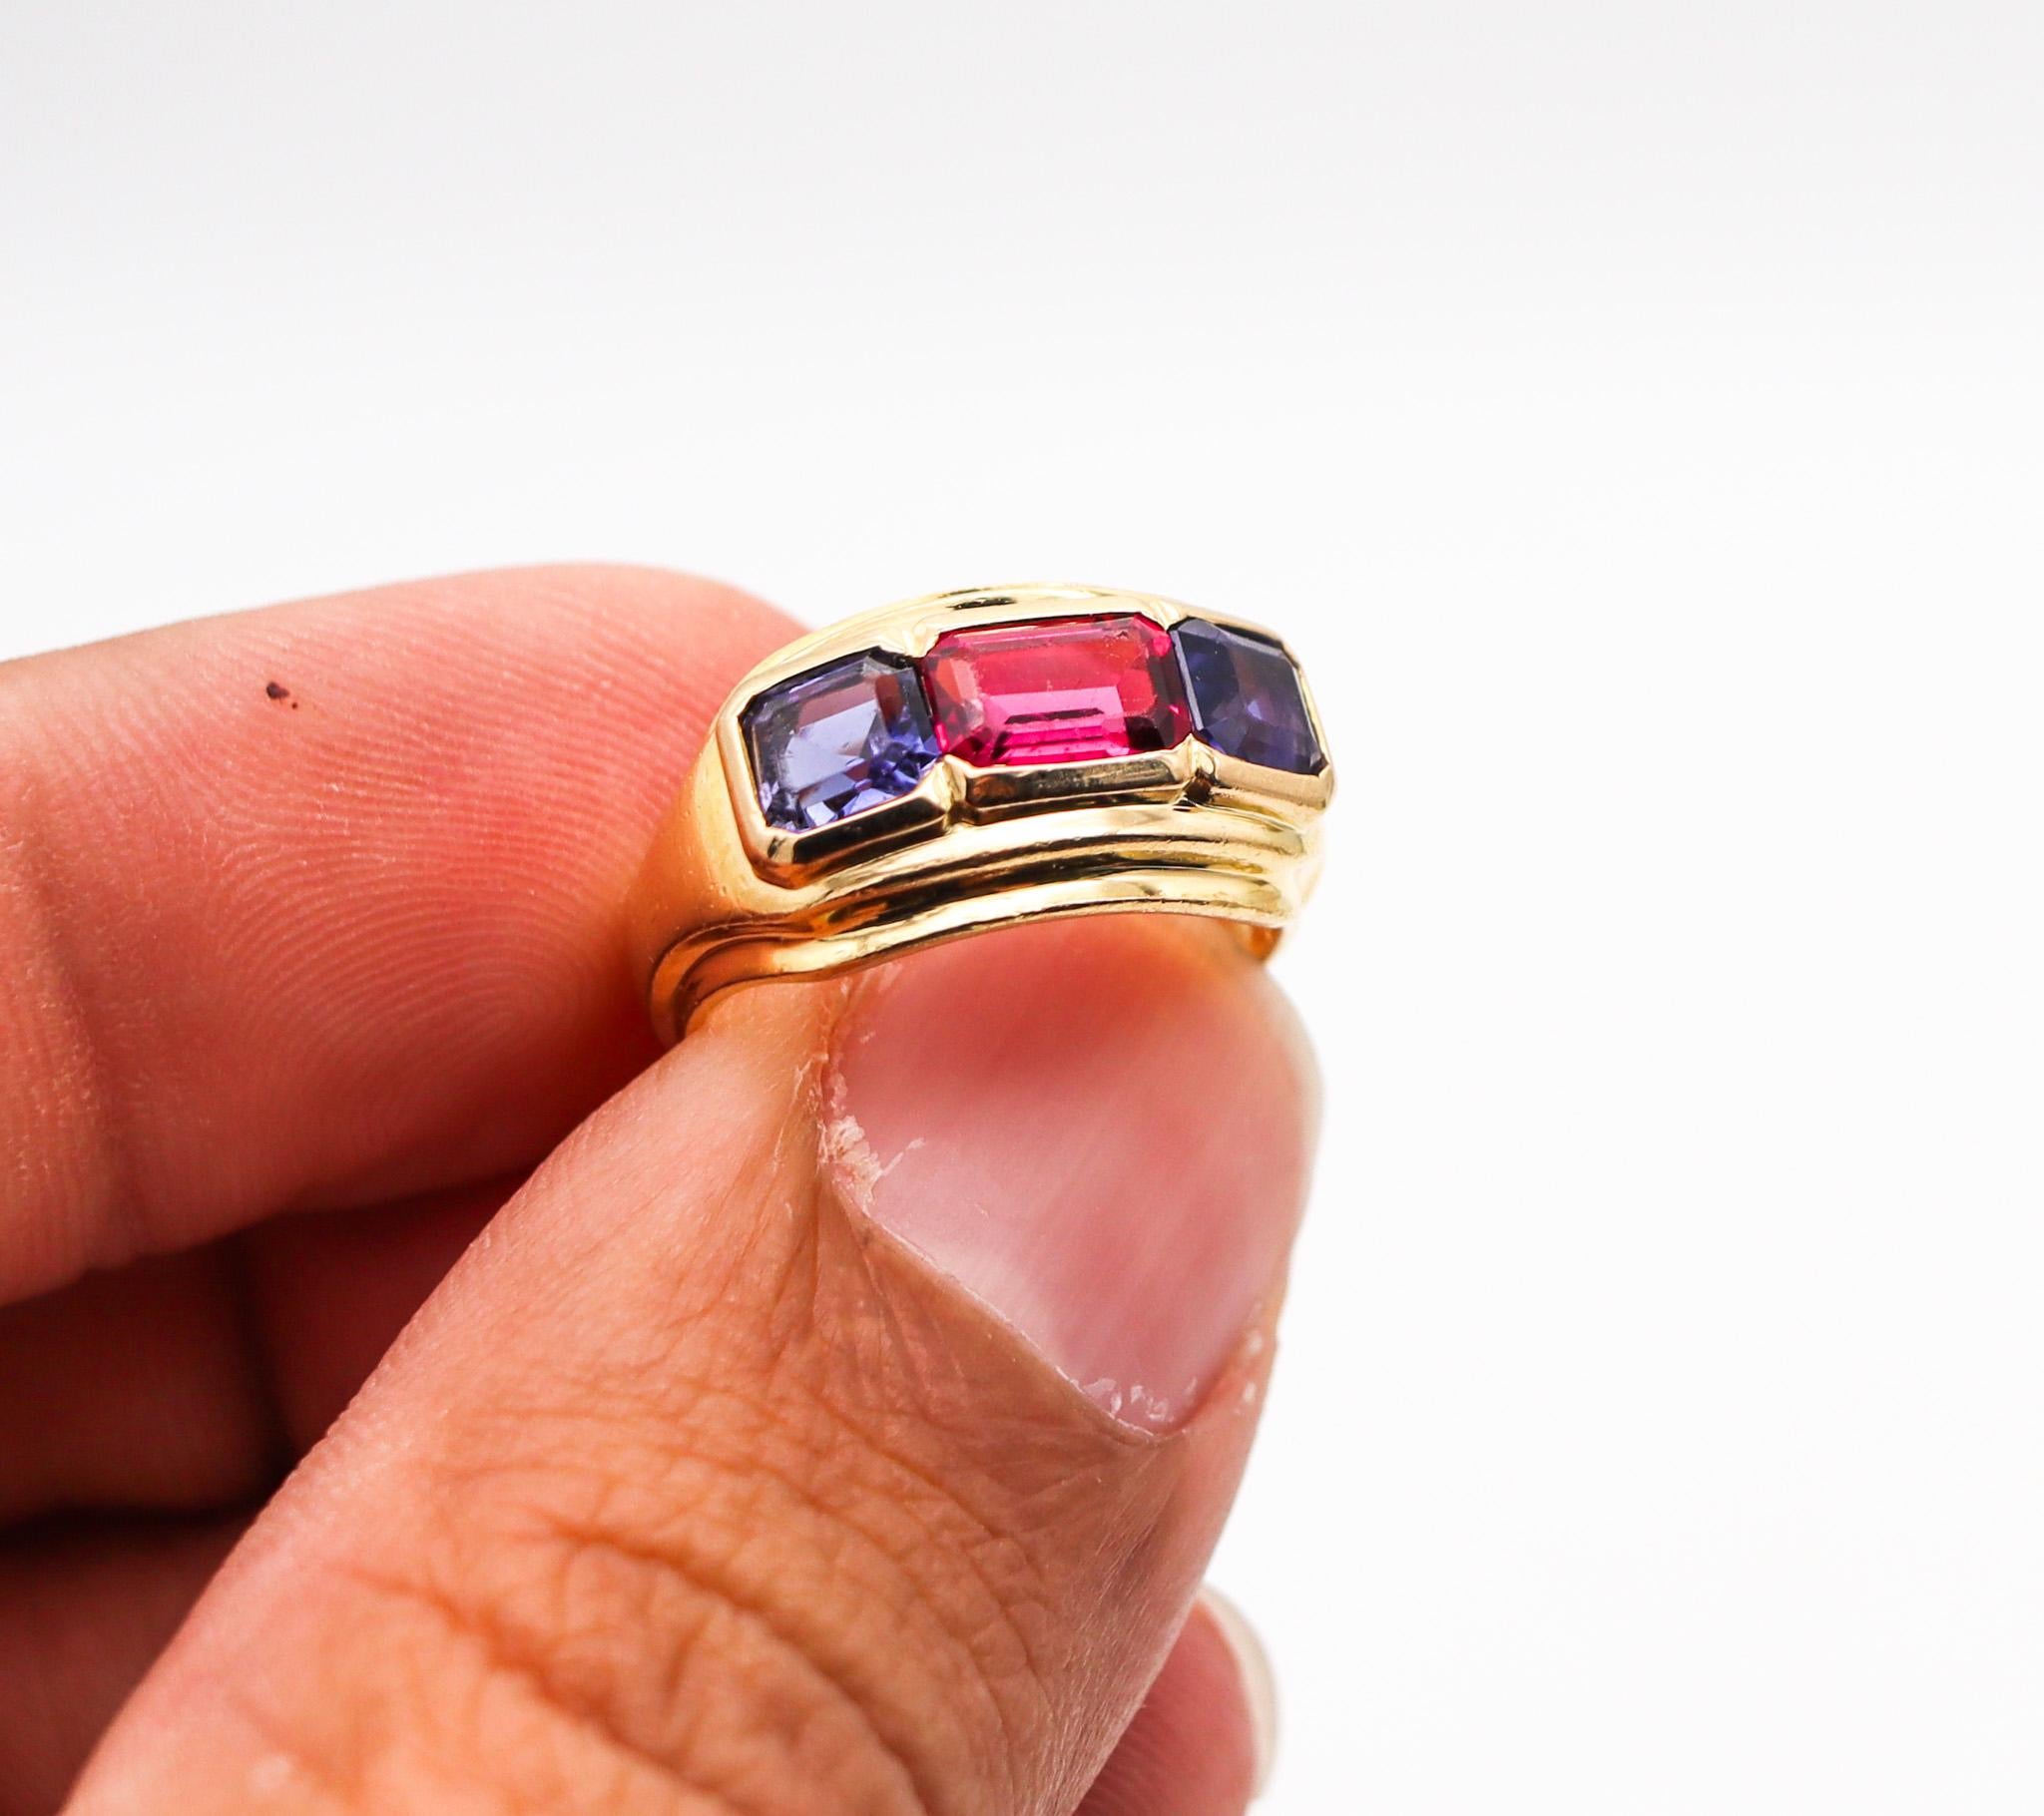 Bvlgari France Three Gems Ring In 18Kt Gold With 2.18 Ctw In Tourmaline & Iolite For Sale 2